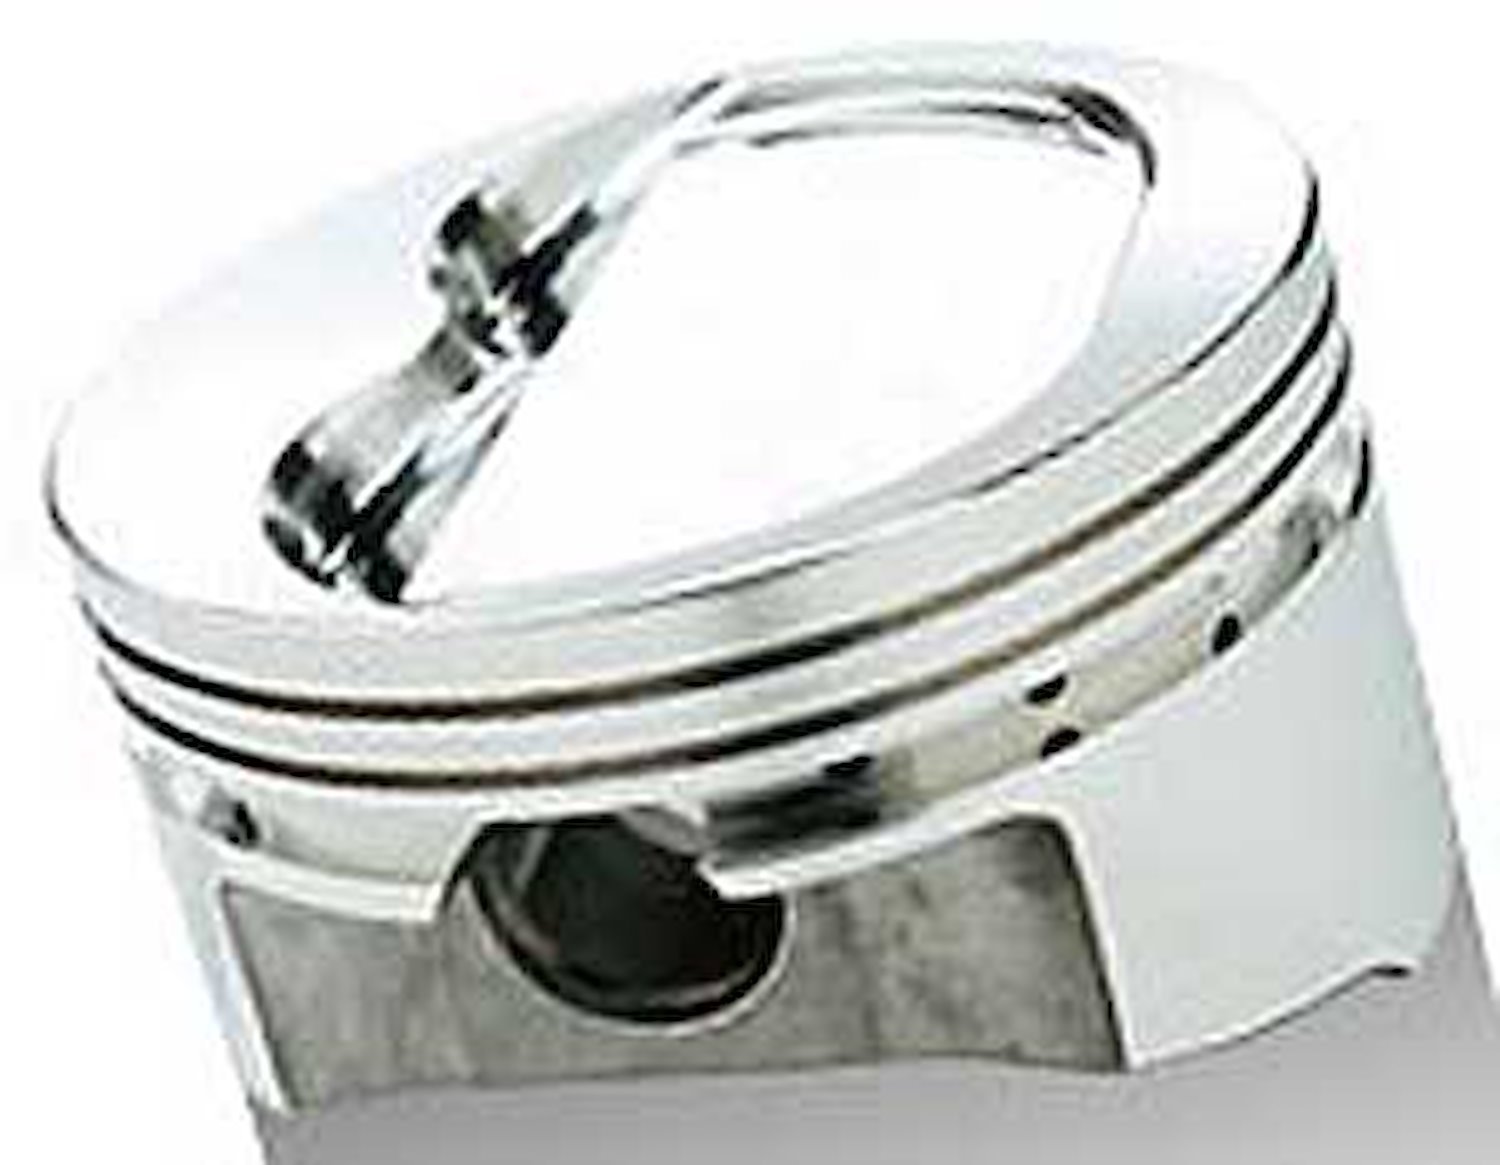 SRP Inverted Dome Pistons for Small Block Chevy 400 Bore 4.165"